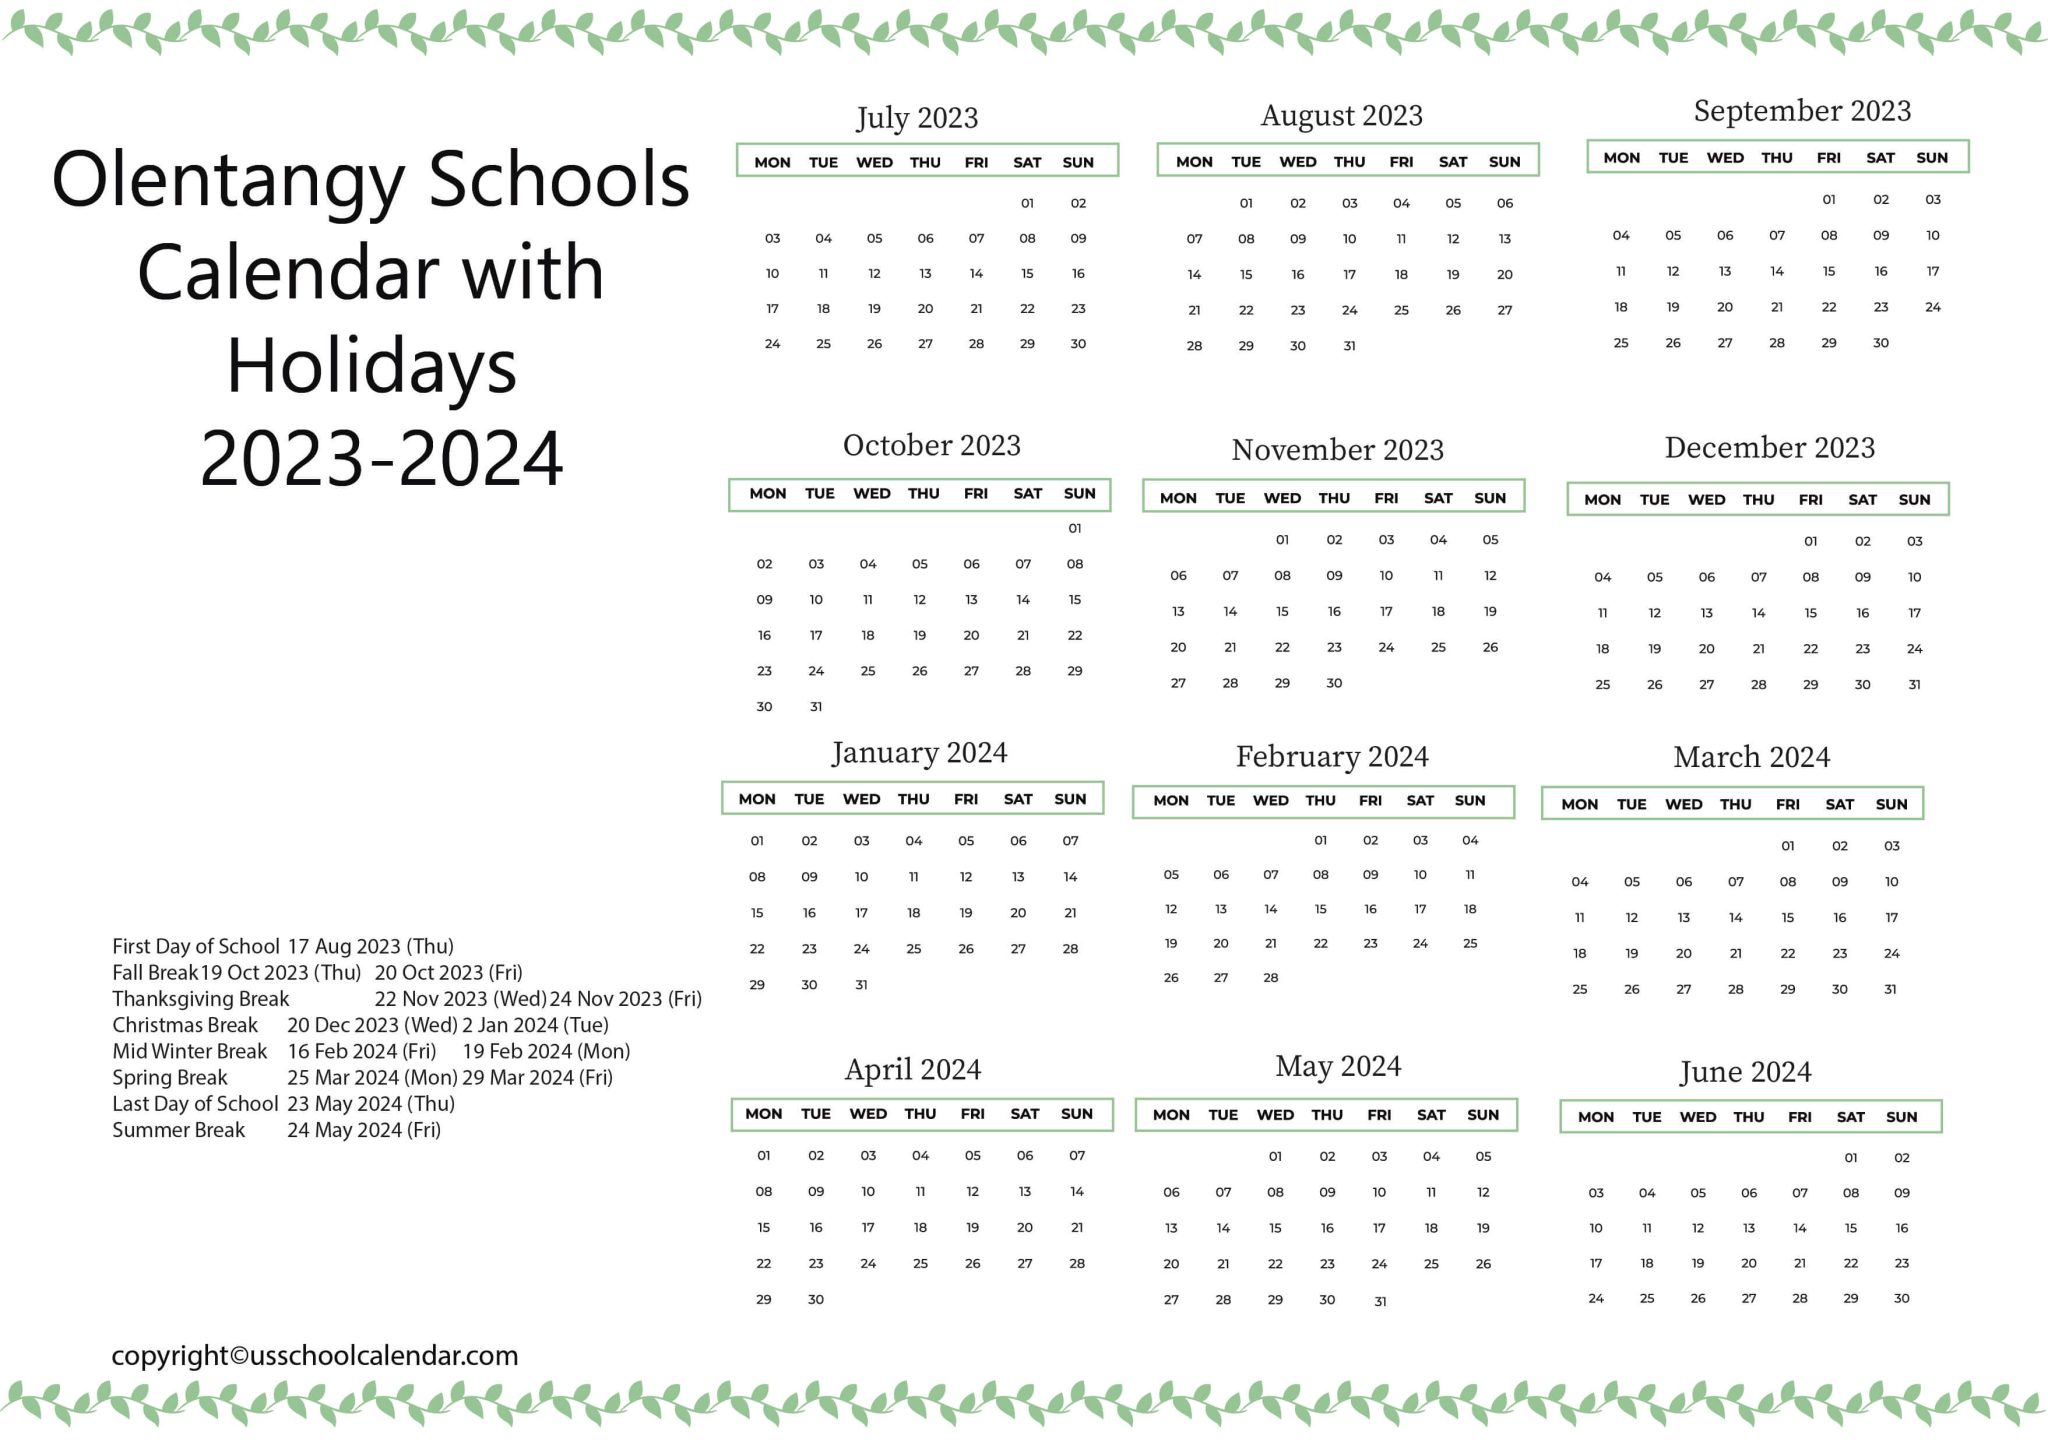 Olentangy Schools Calendar with Holidays 2023 2024